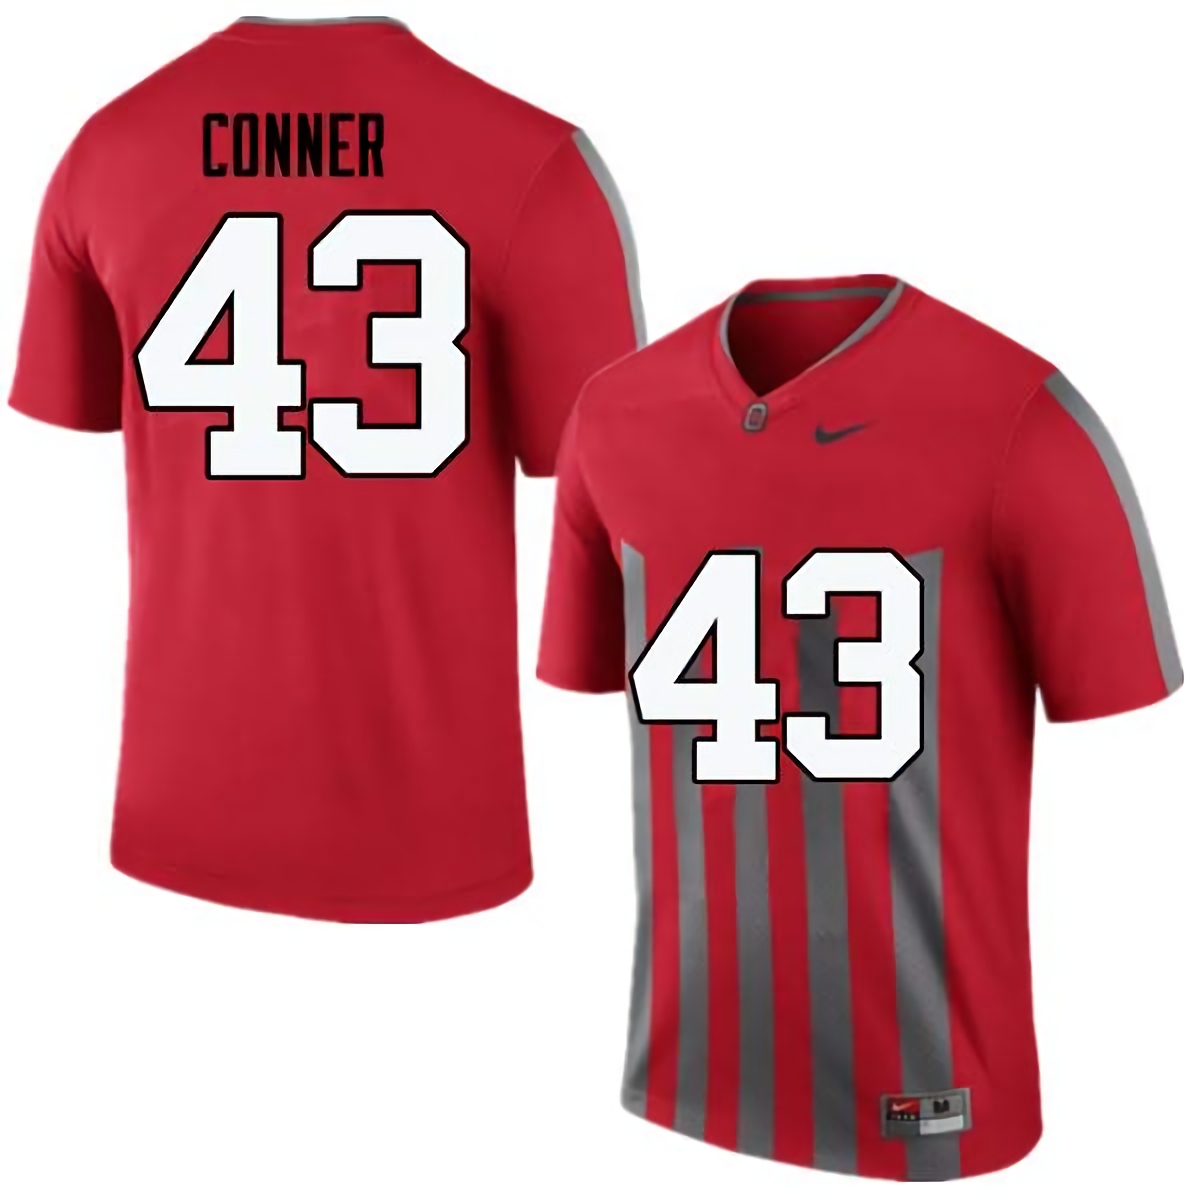 Nick Conner Ohio State Buckeyes Men's NCAA #43 Nike Throwback Red College Stitched Football Jersey OMW5756KM